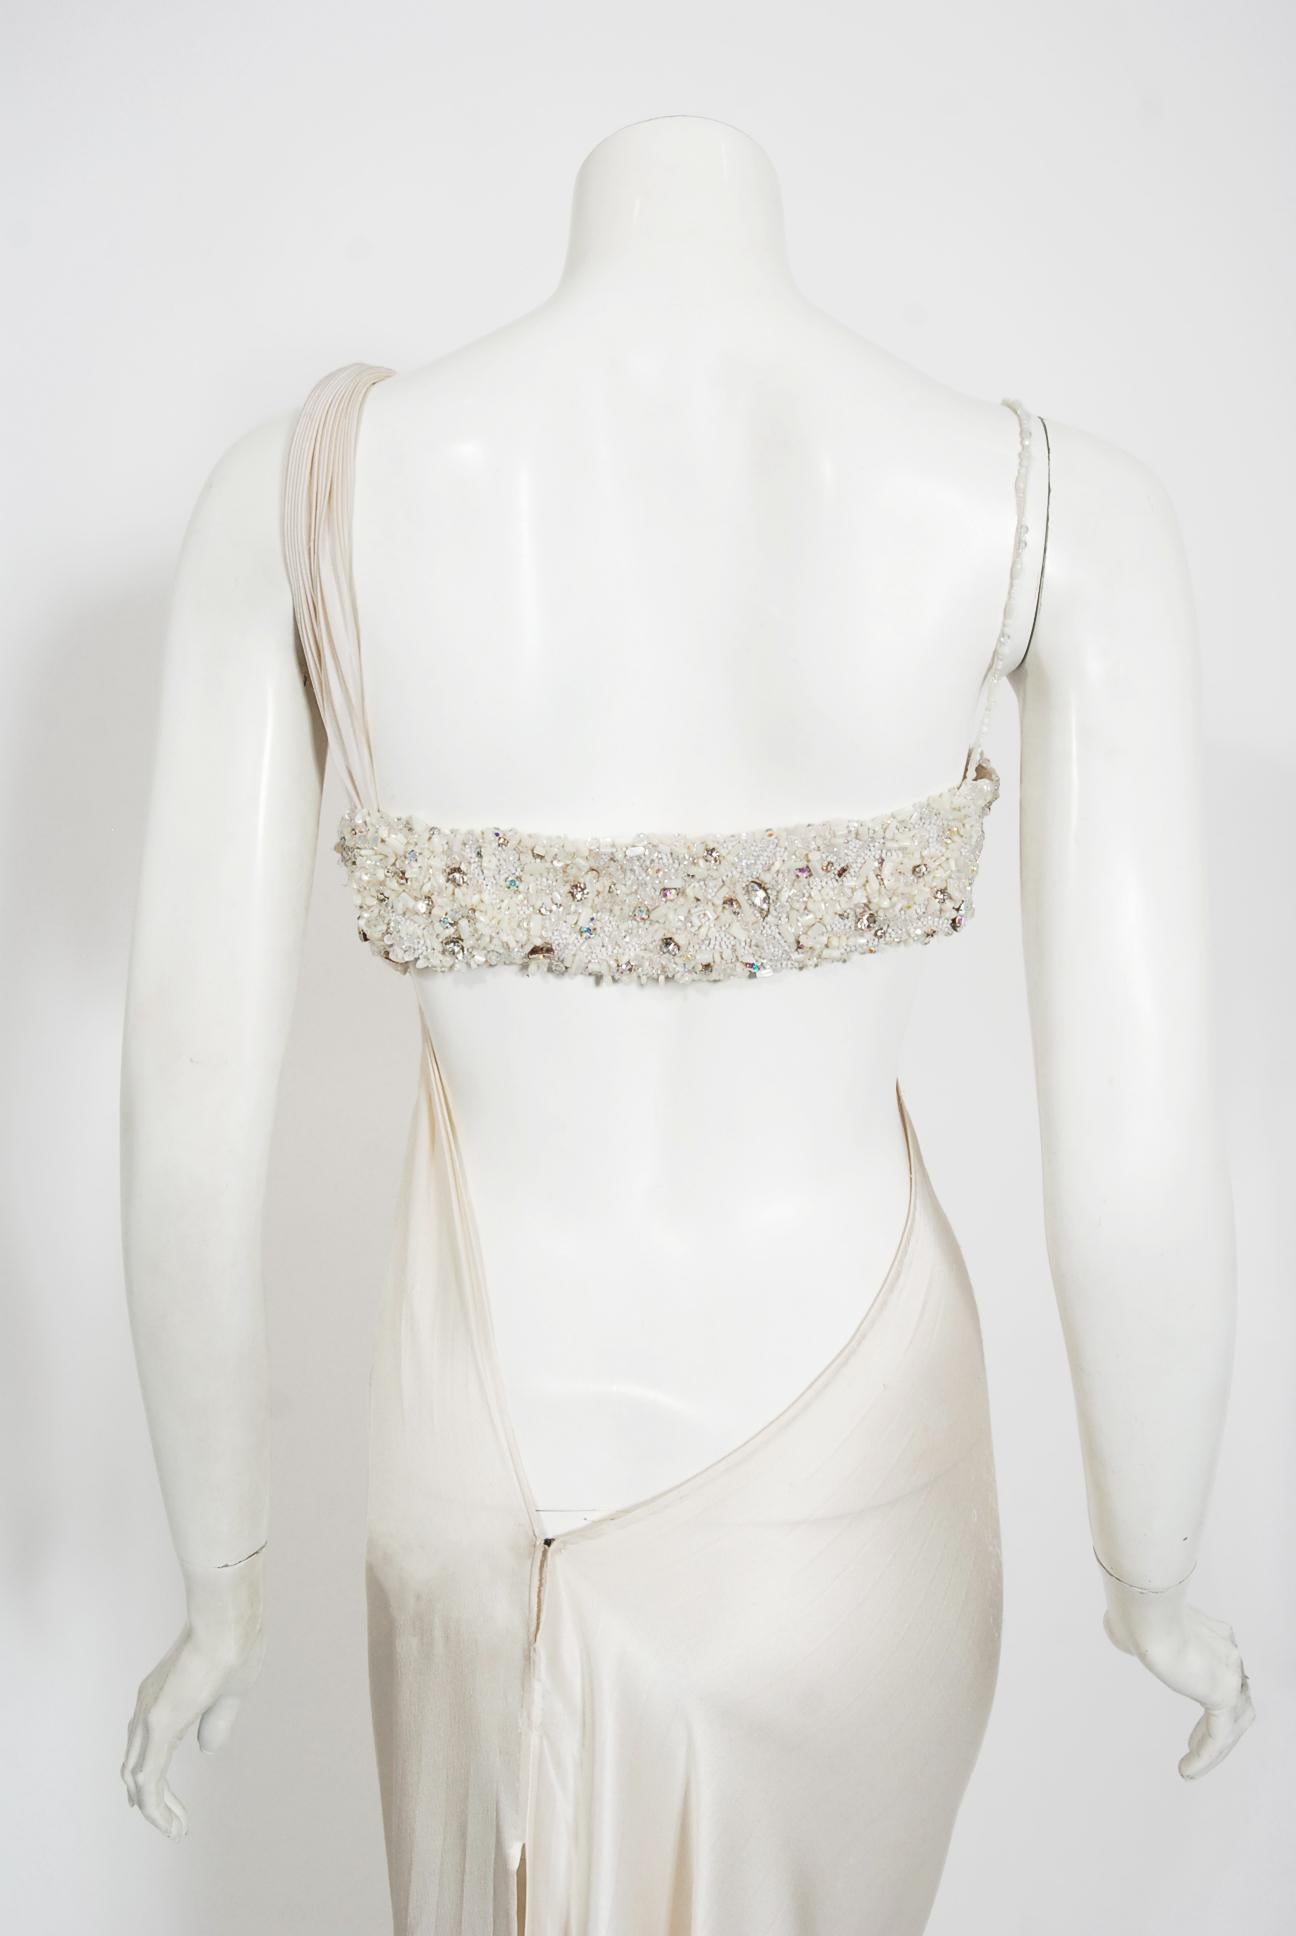 2000 Ungaro Haute Couture Crystal Beaded Asymmetric Cut-Out Ivory Silk Gown 8